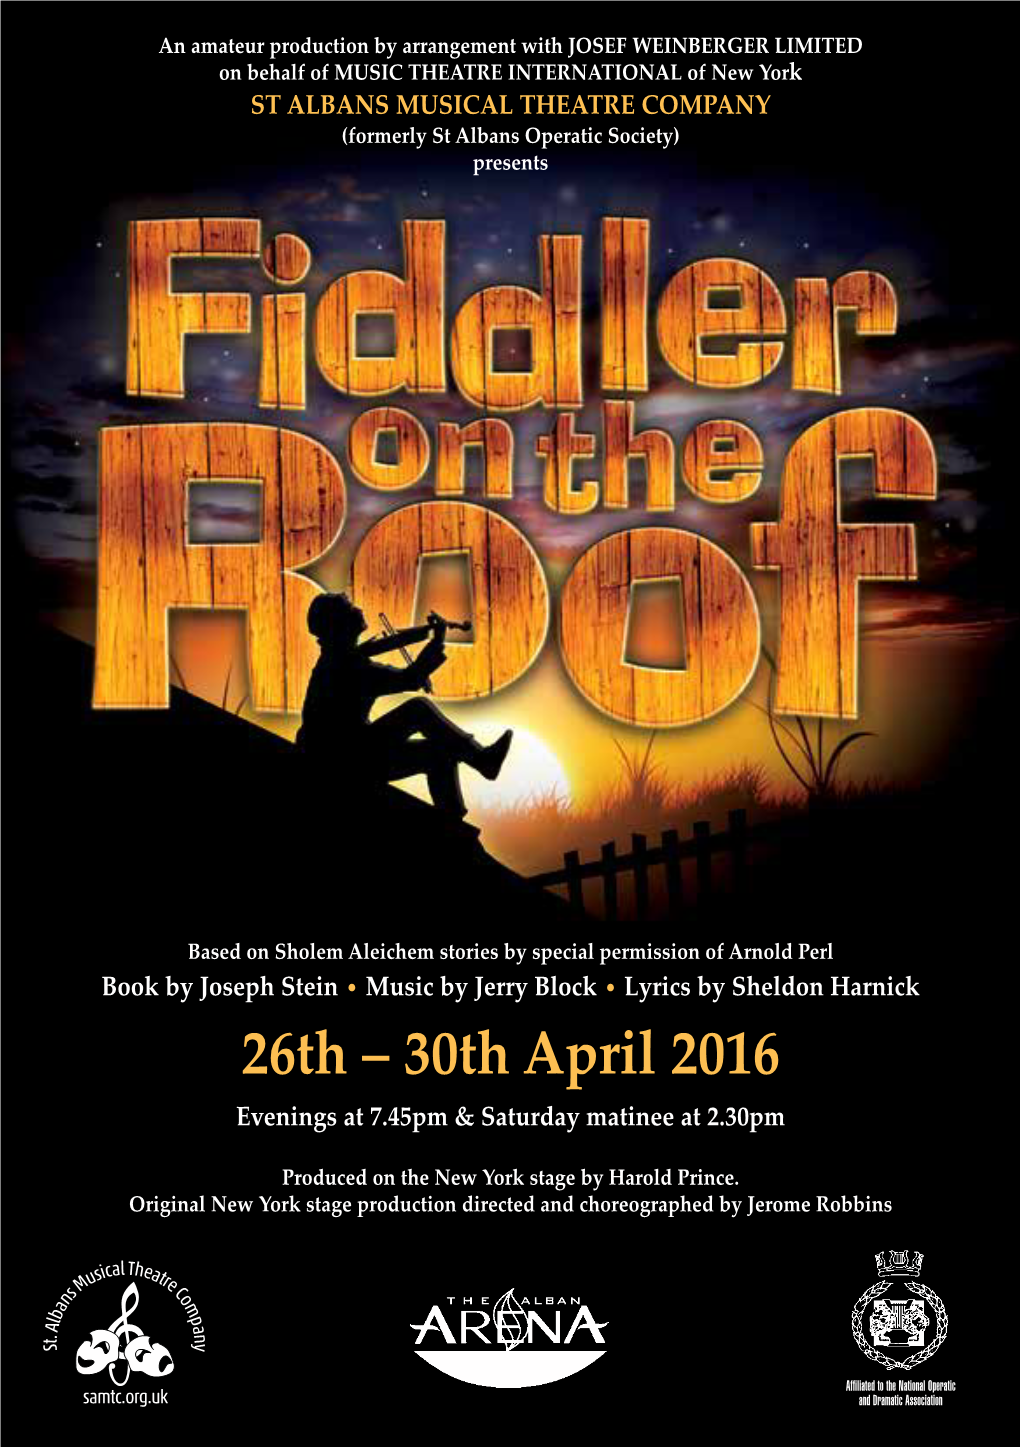 Fiddler on the Roof Edited